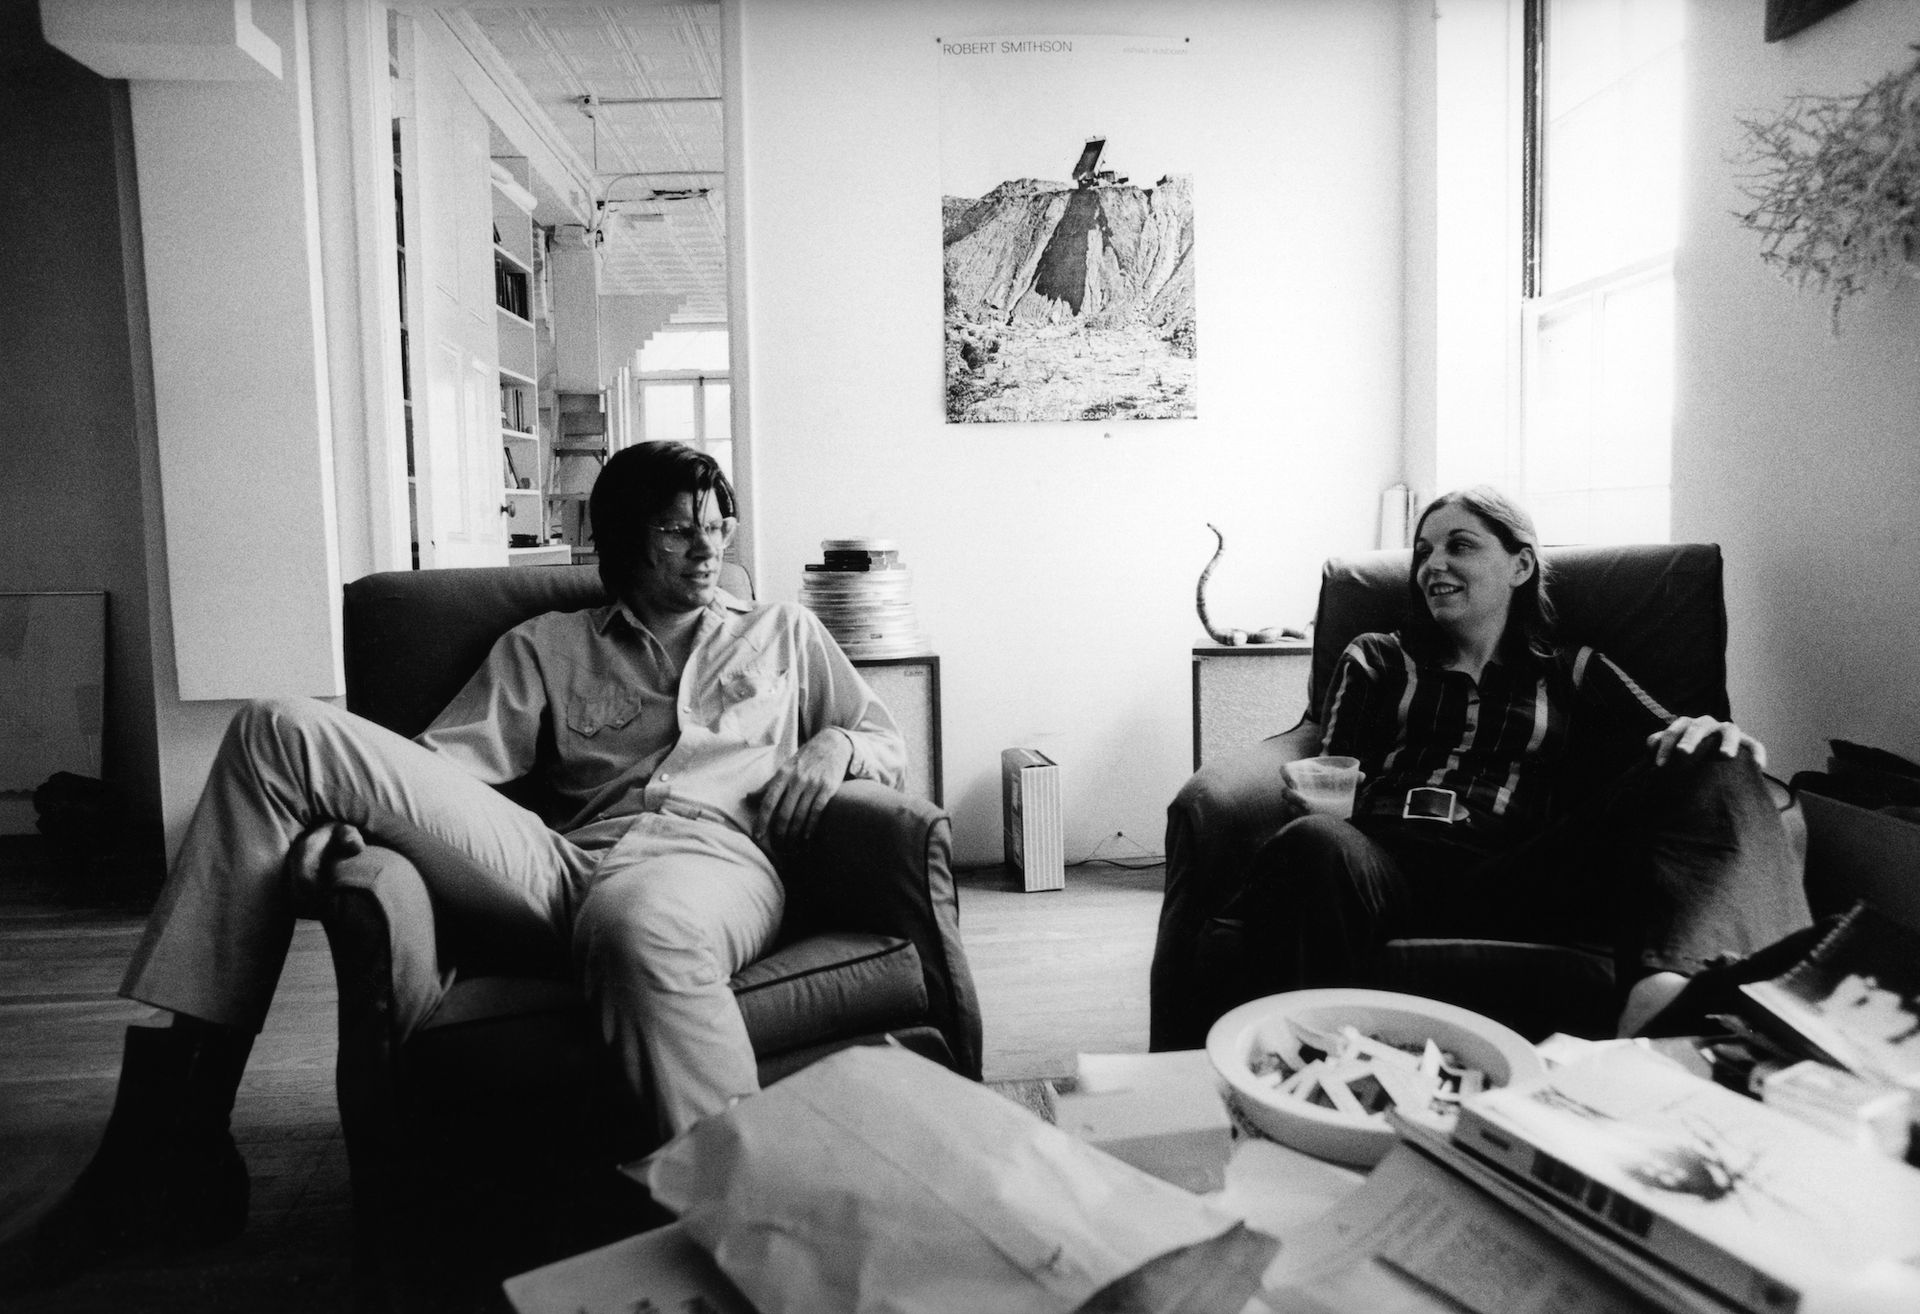 Nancy Holt and Robert Smithson in their Greenwich Street loft, New York City, 1970 Photograph: Gianfranco Gorgoni. © Holt/Smithson Foundation / Licensed by Artists Rights Society, New York